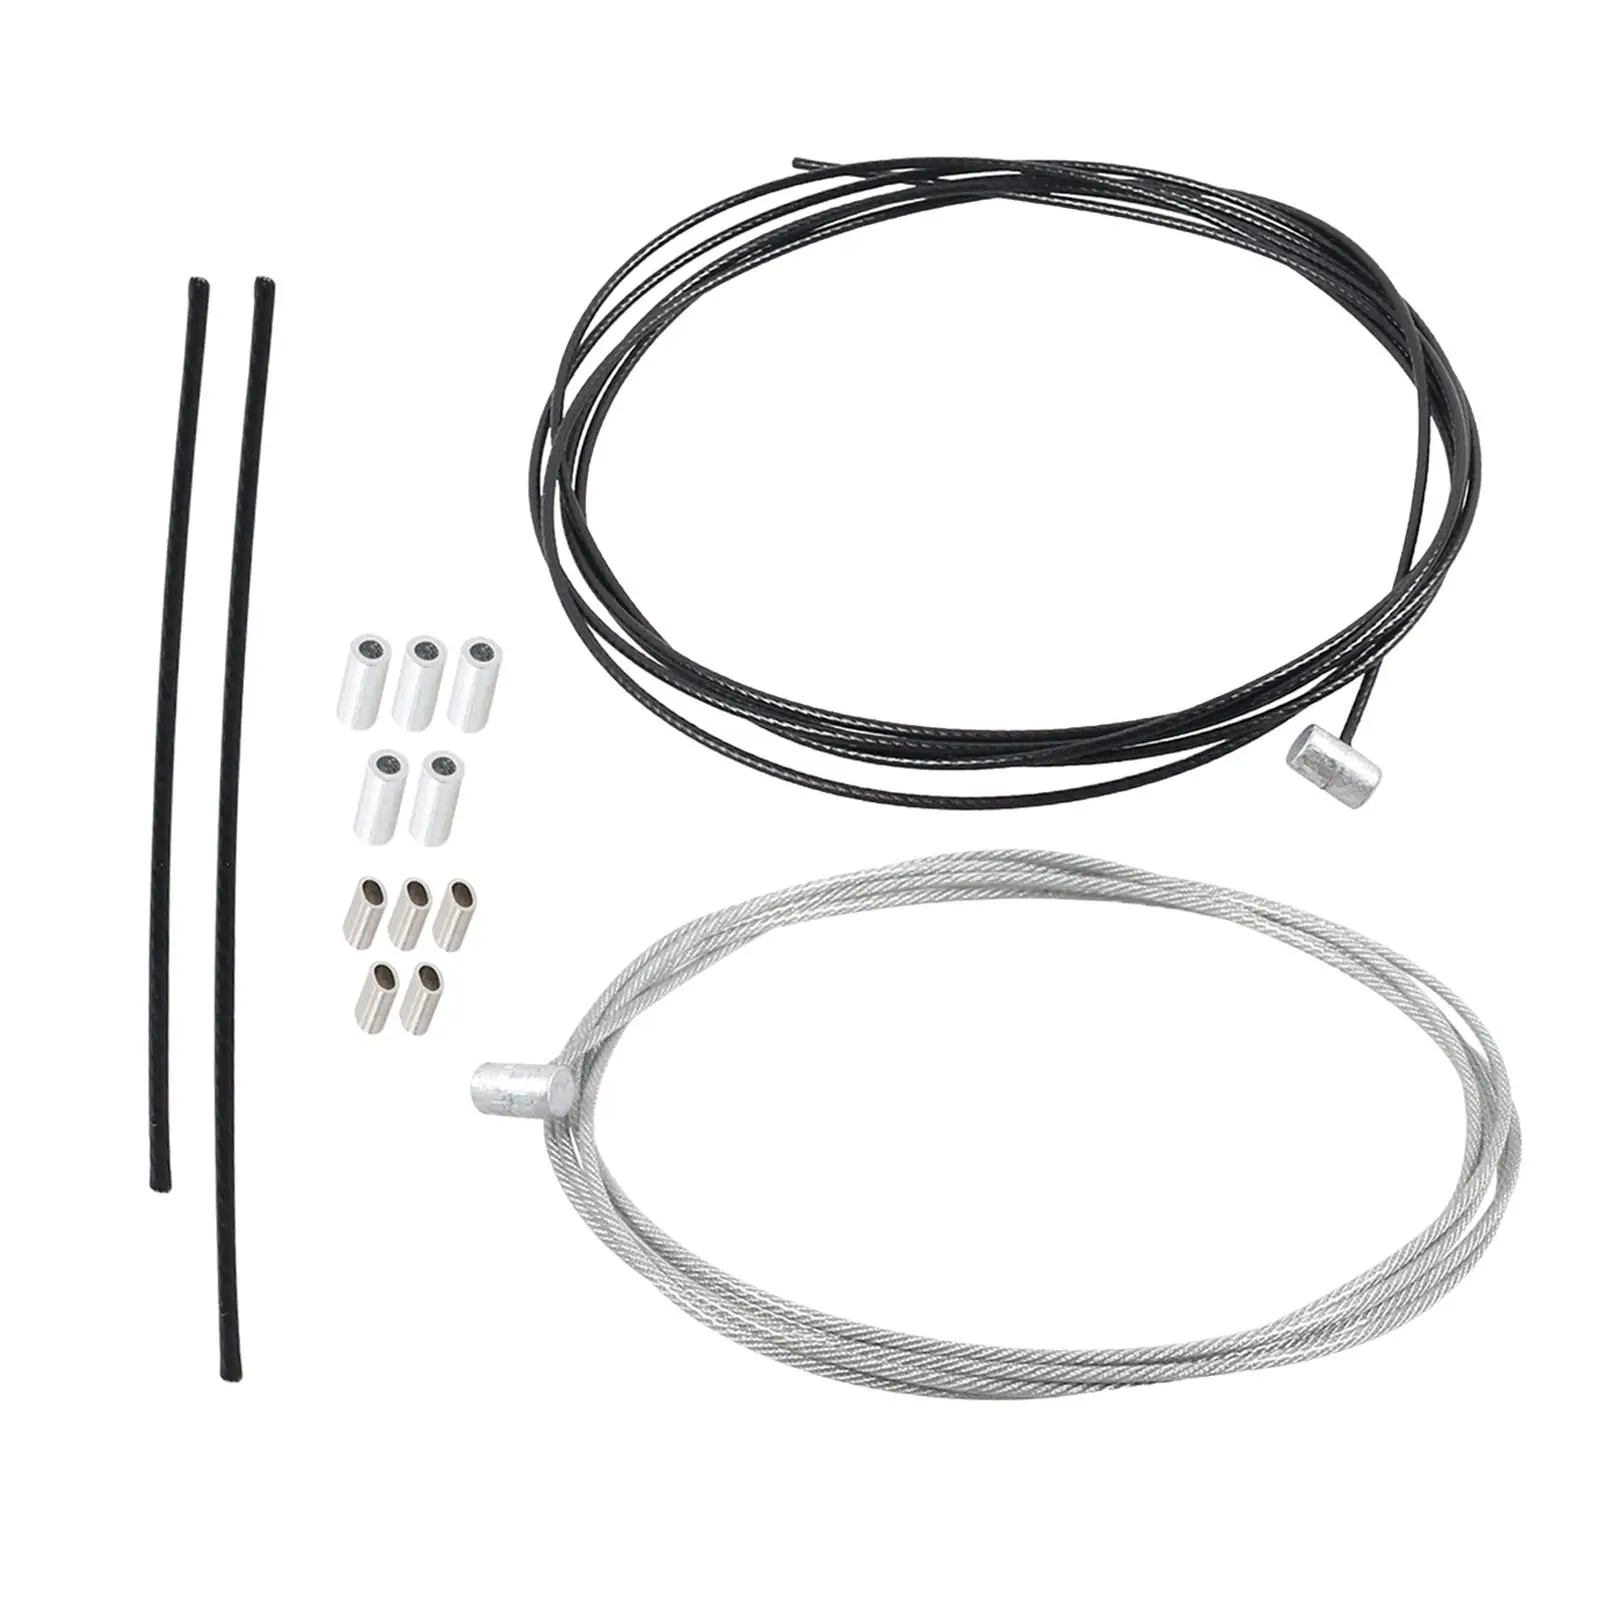 L & R Side Sliding Door Cable Repair Kit fits for Honda 72010-TK8-A12, Easy to Install